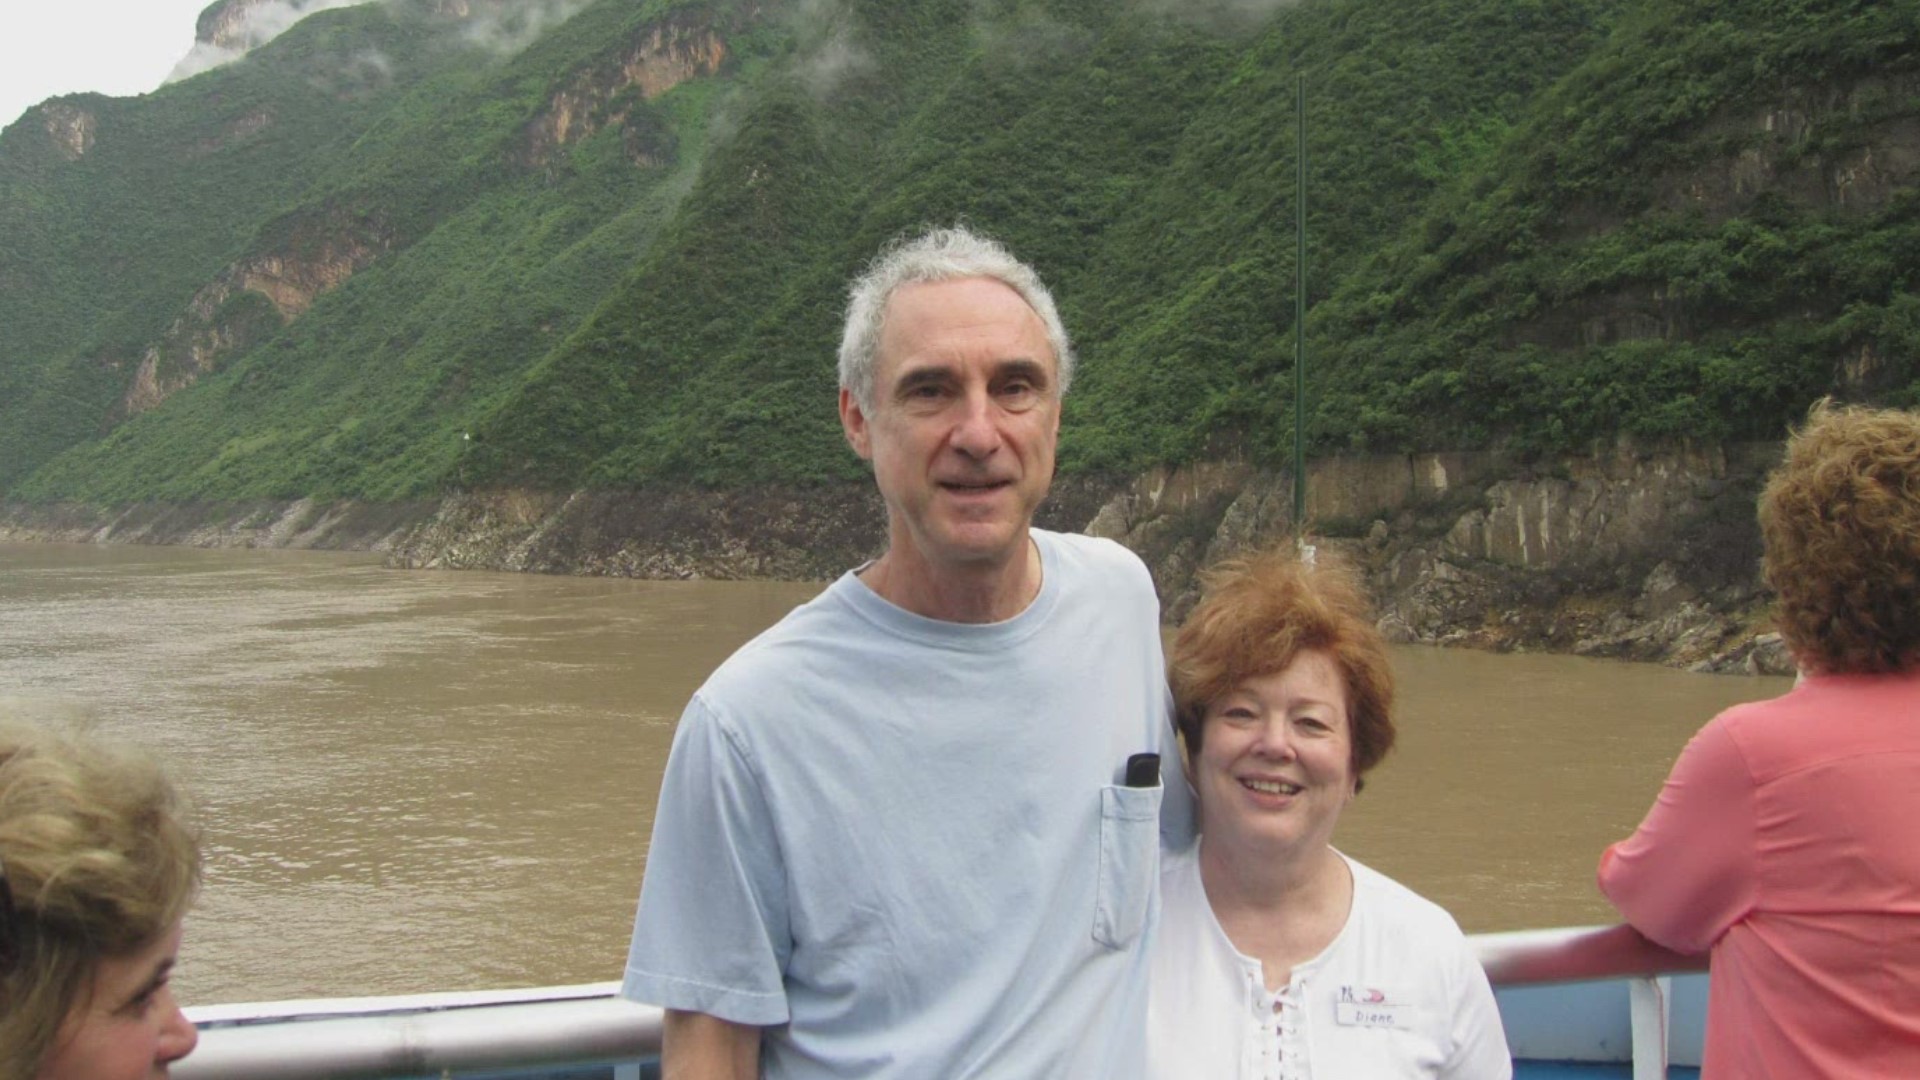 For people like Ken Deutsch, the coronavirus vaccine offers an opportunity to close the gap between him and his wife